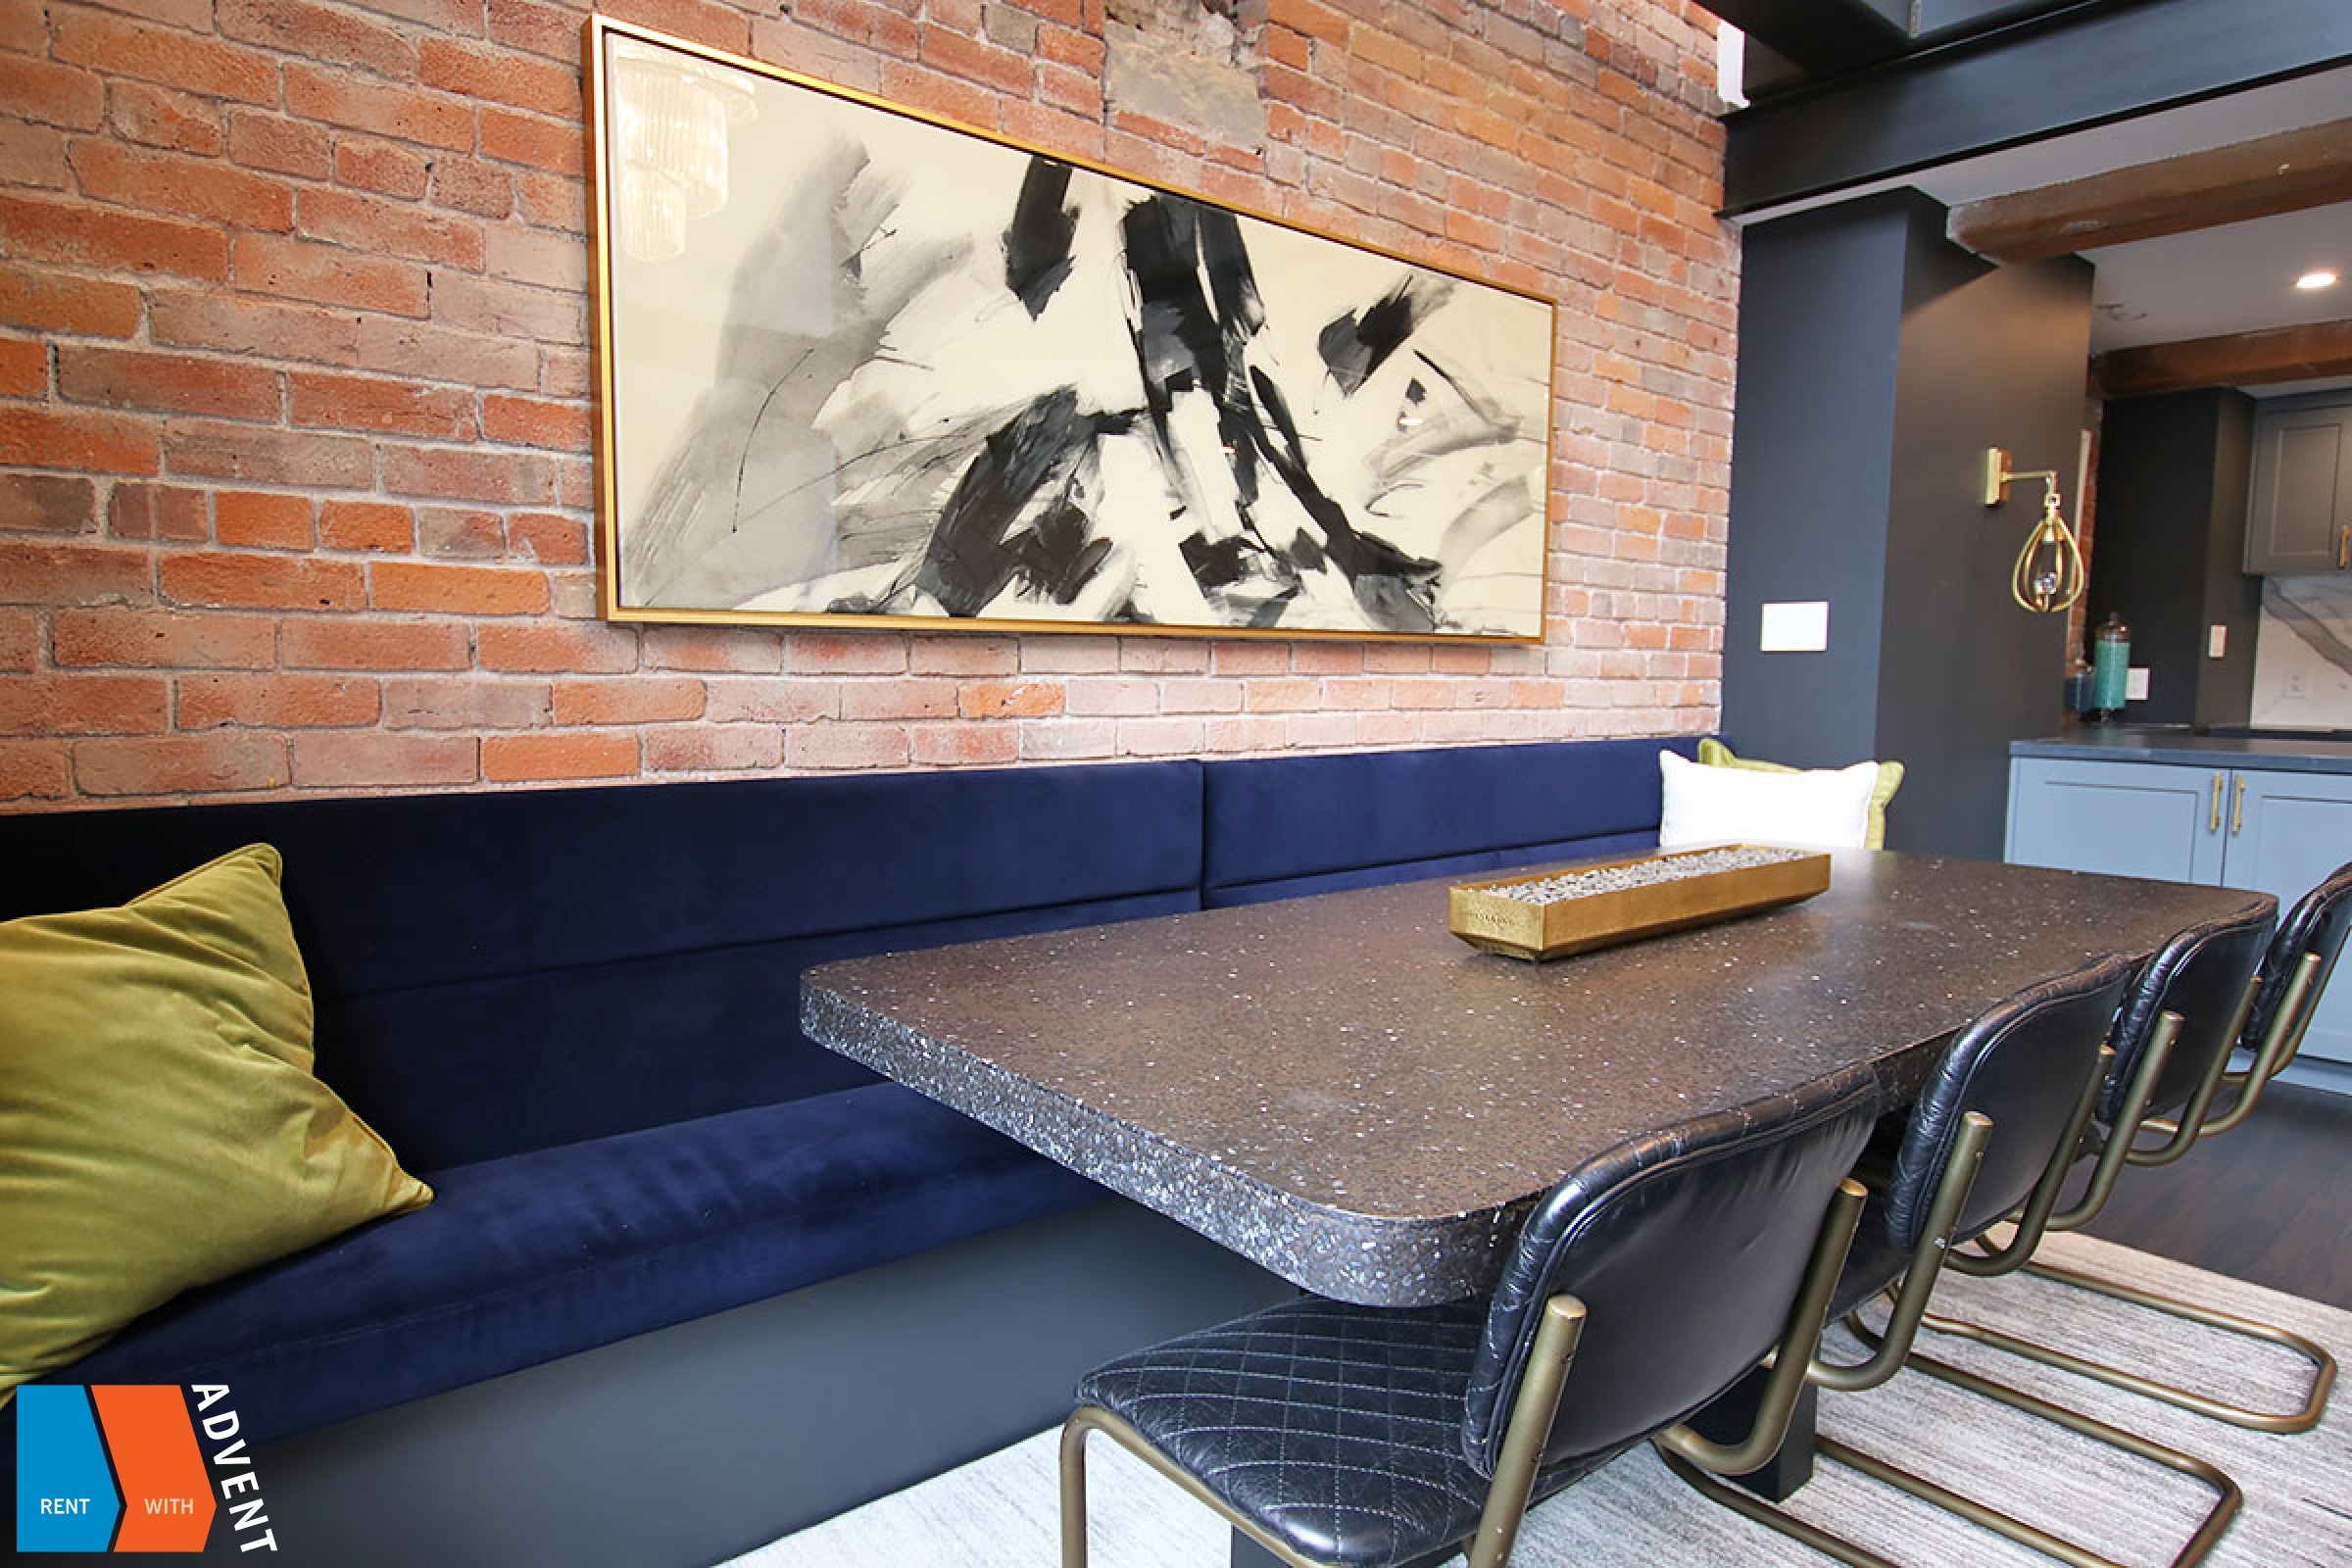 Fully Furnished 2 Level 1 Bedroom Loft For Rent at Bowman Lofts in Downtown Vancouver. 303 - 528 Beatty Street, Vancouver, BC, Canada.